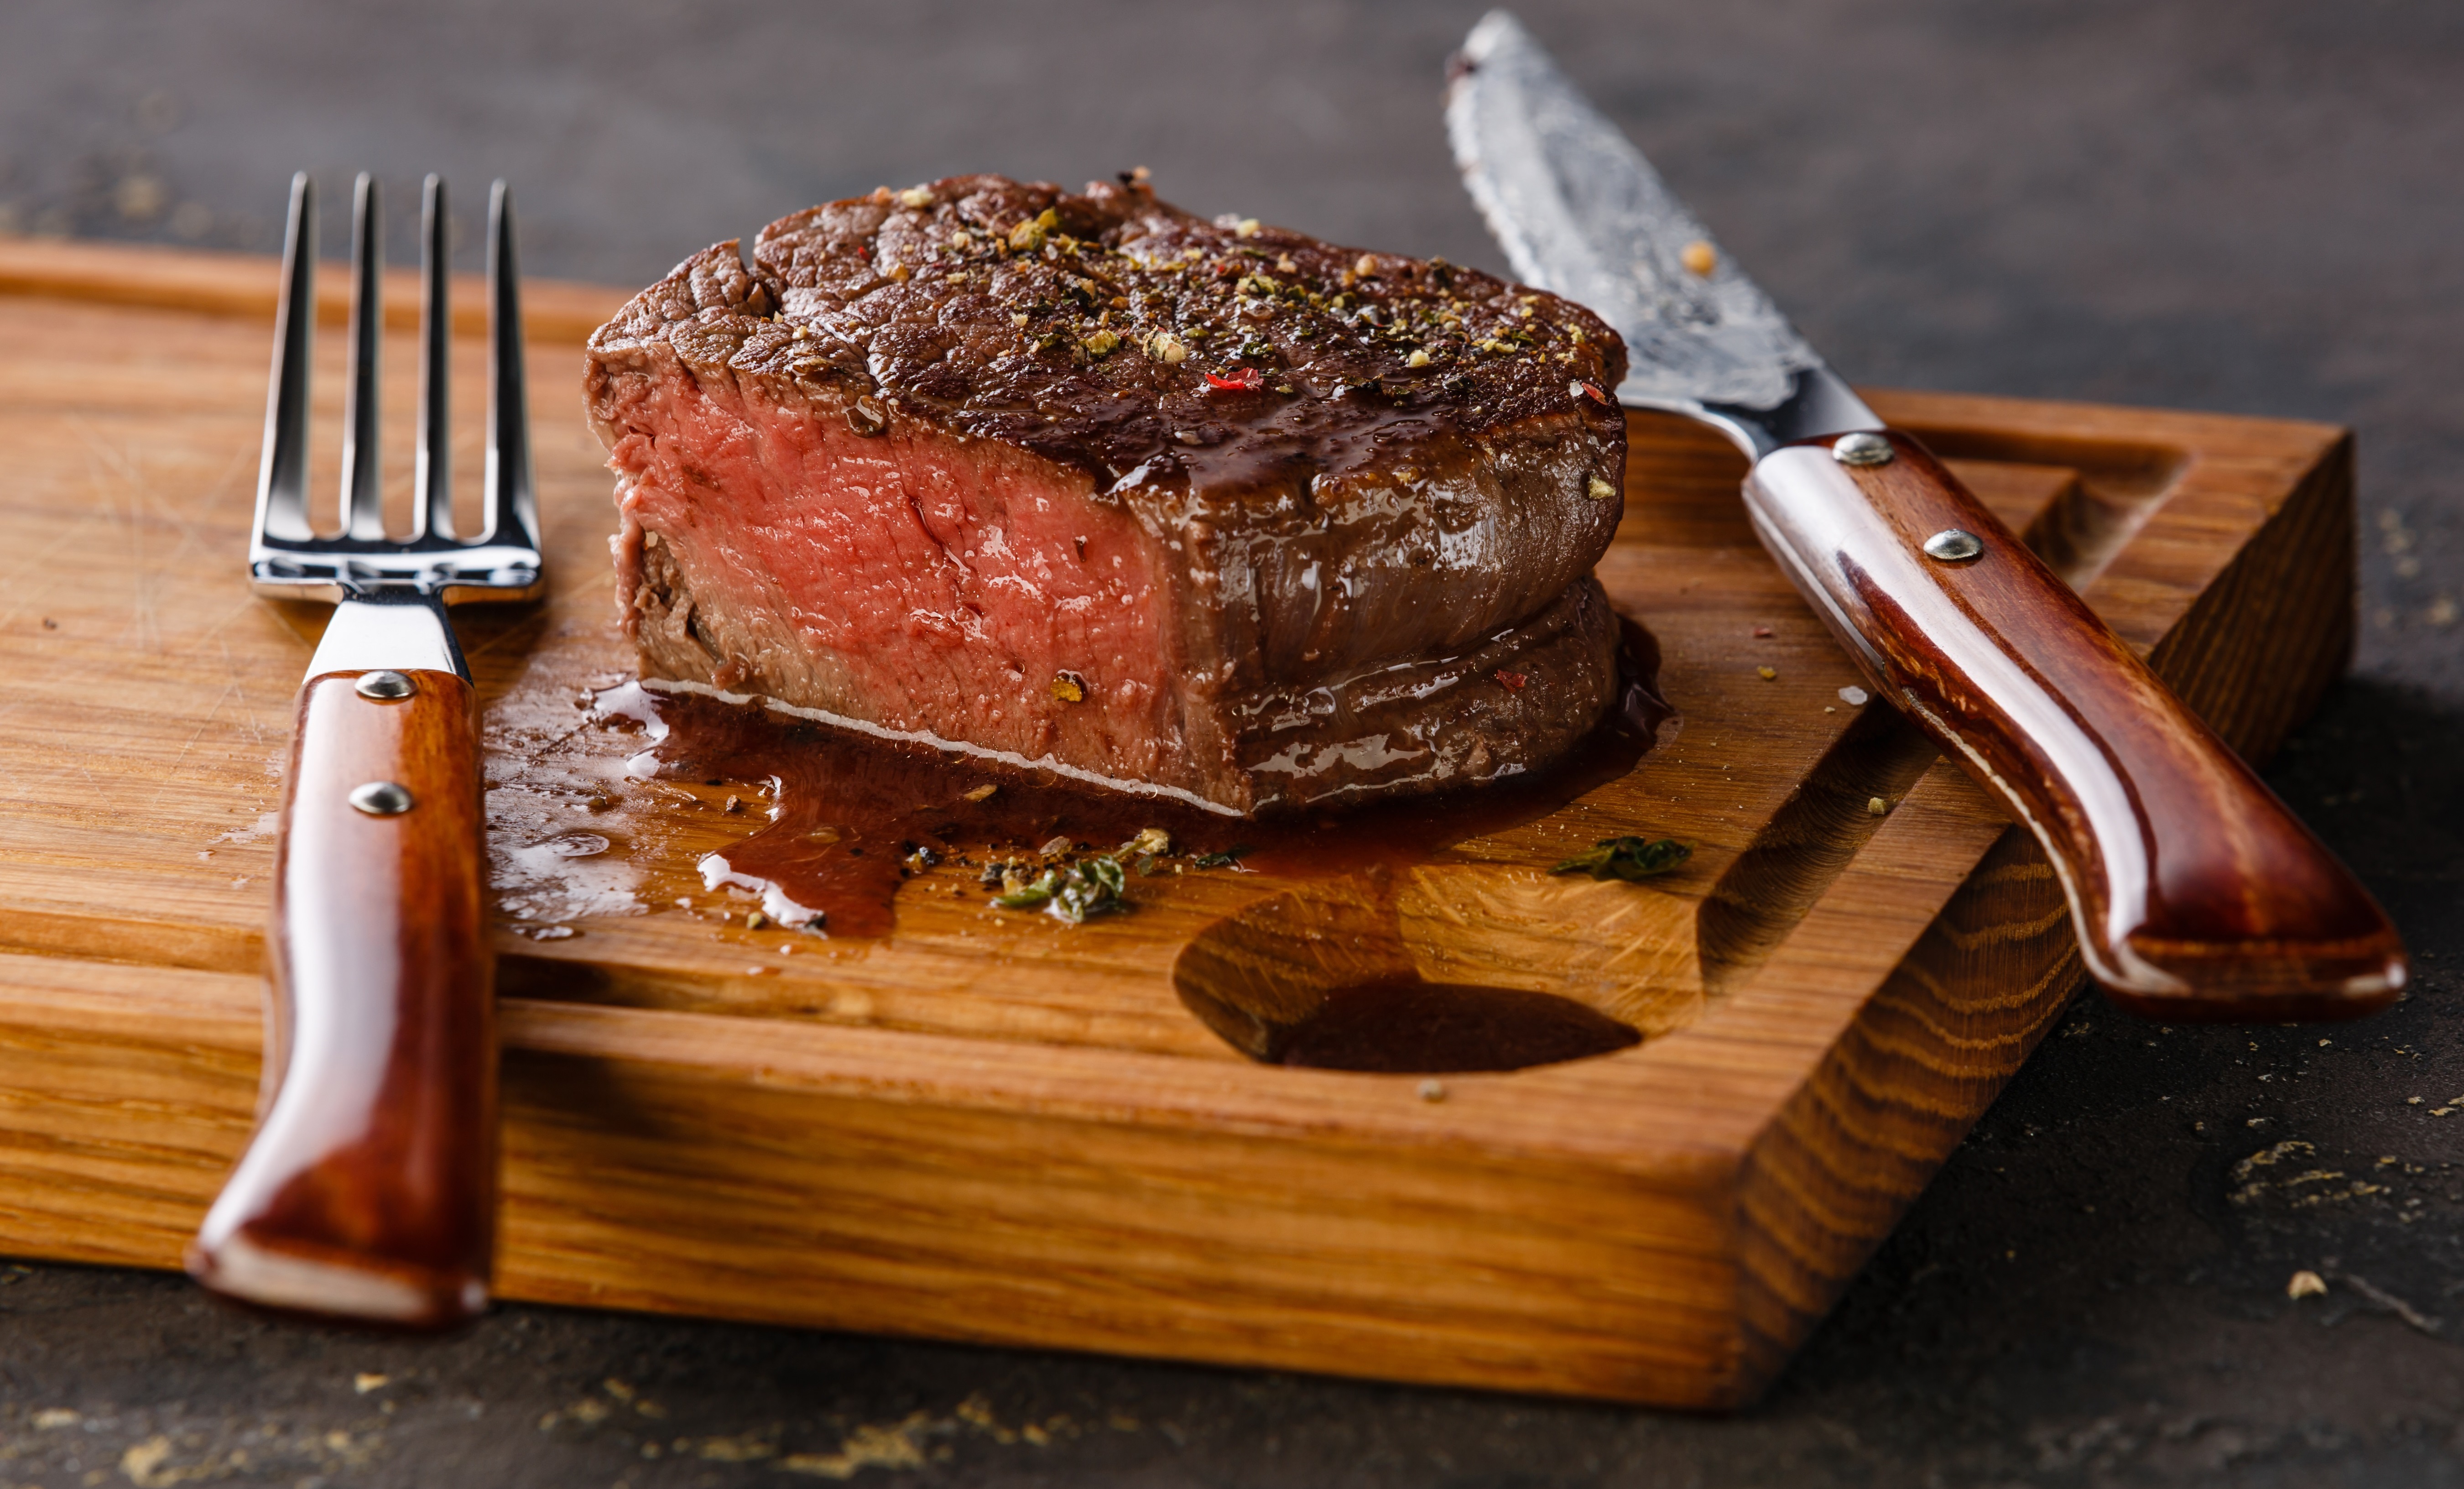 Steak au Poivre (A Picture-Perfect Filet) - Dinner Parties and More